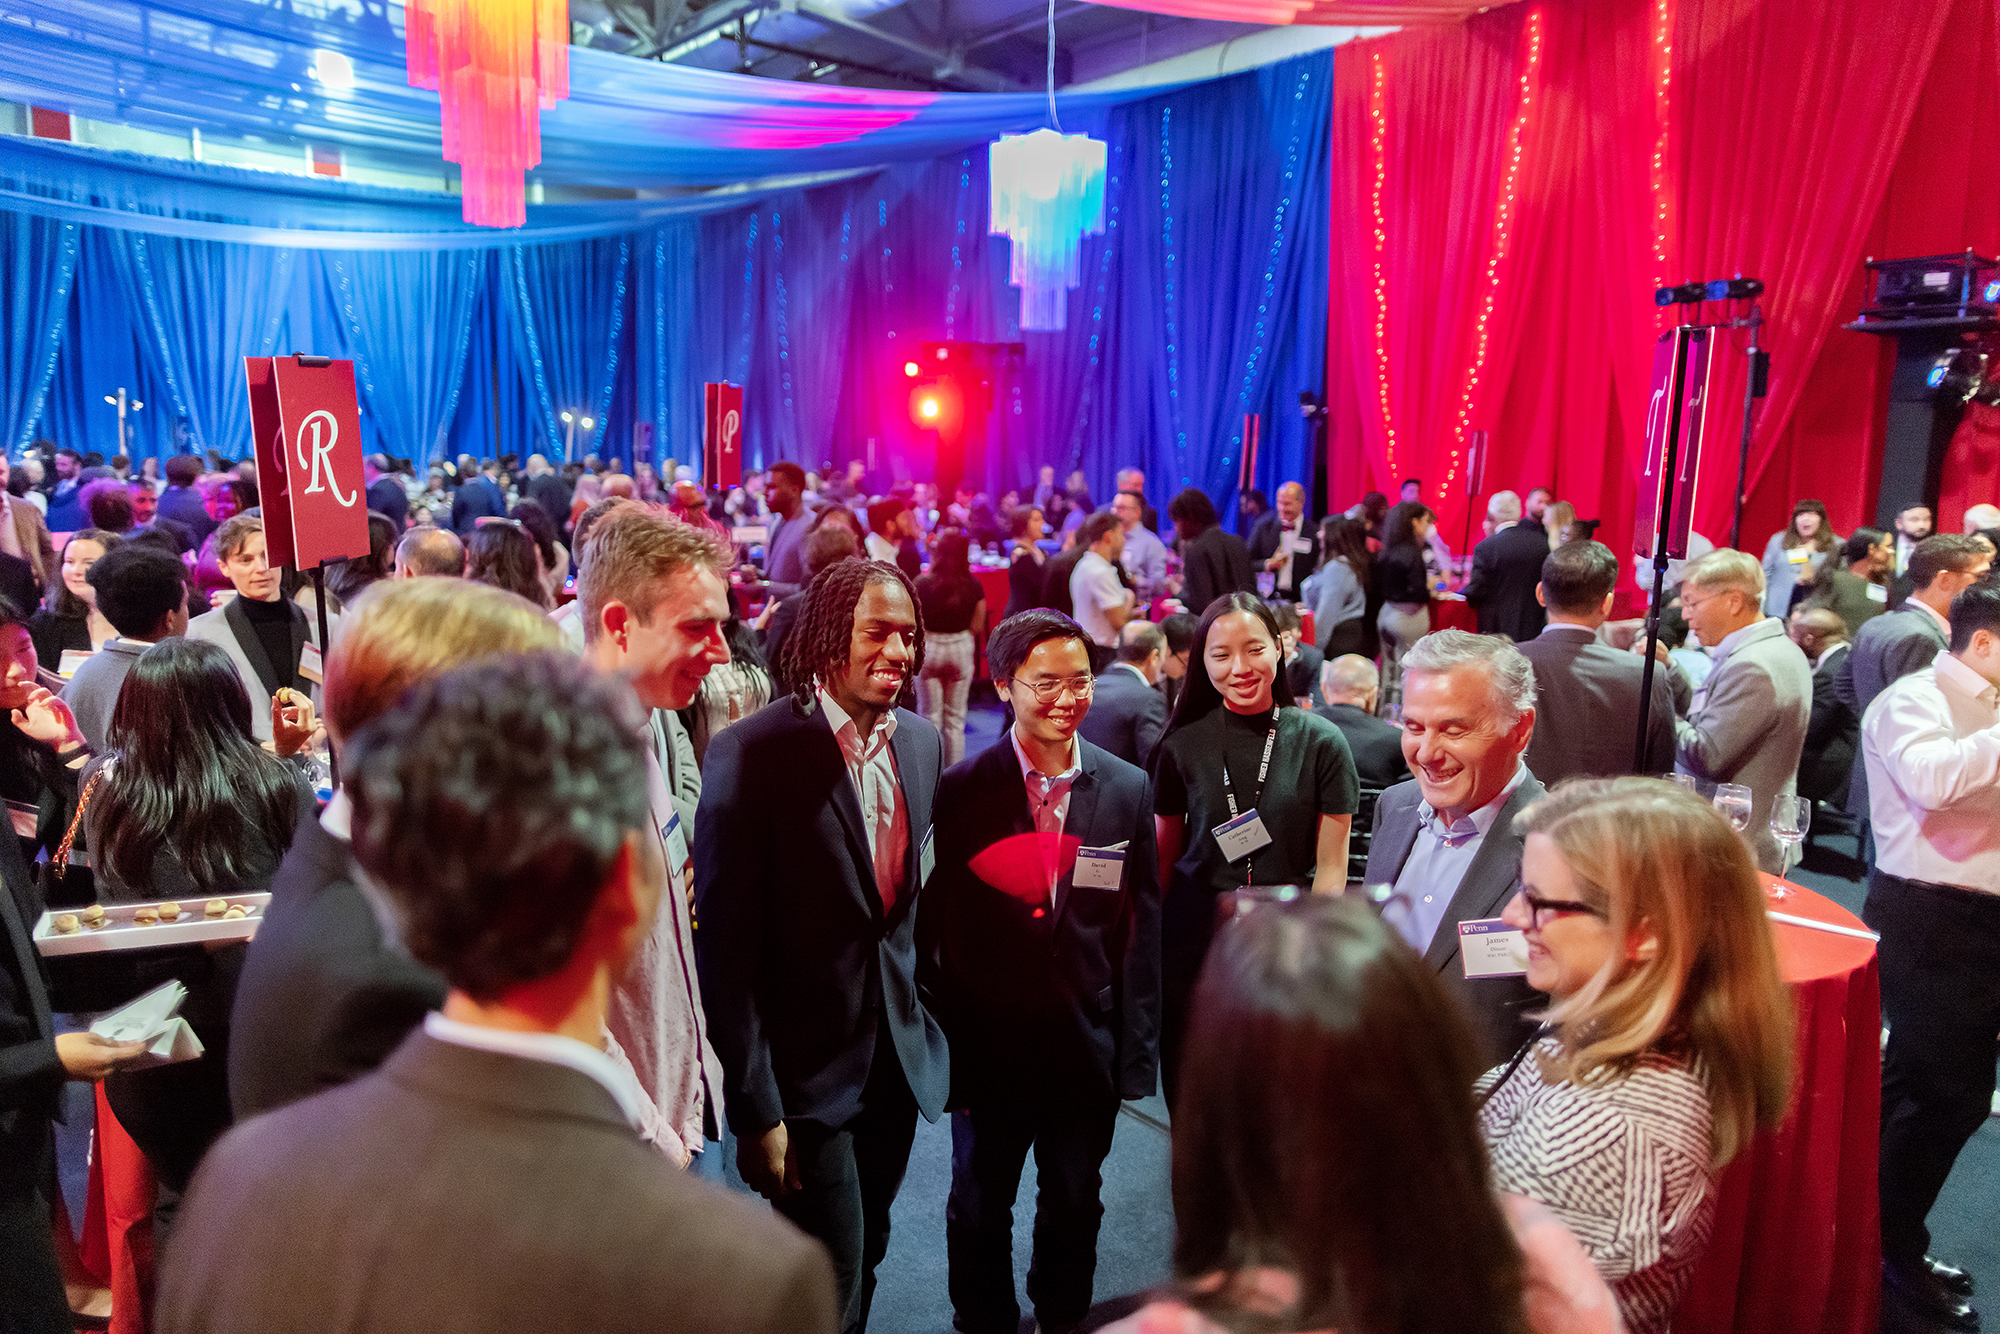 People gather inside a red-and-blue decorated gym